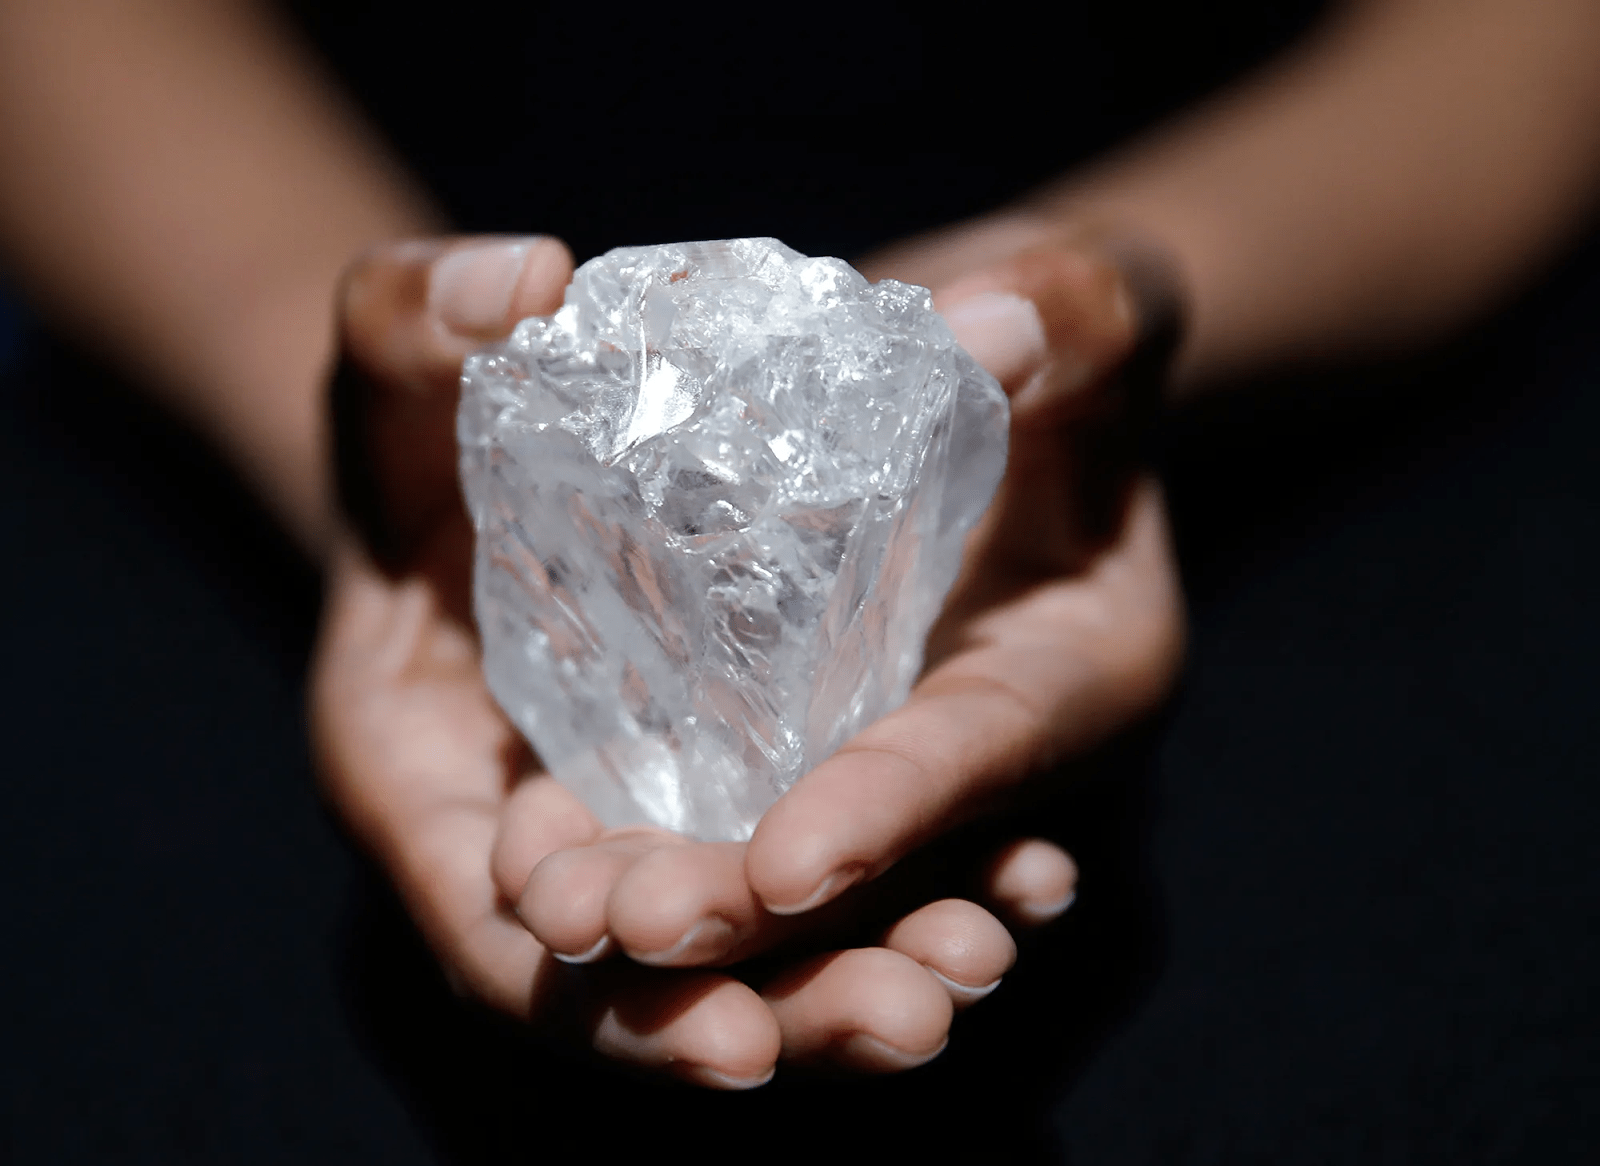 Physical Properties That Make Diamonds Sparkle